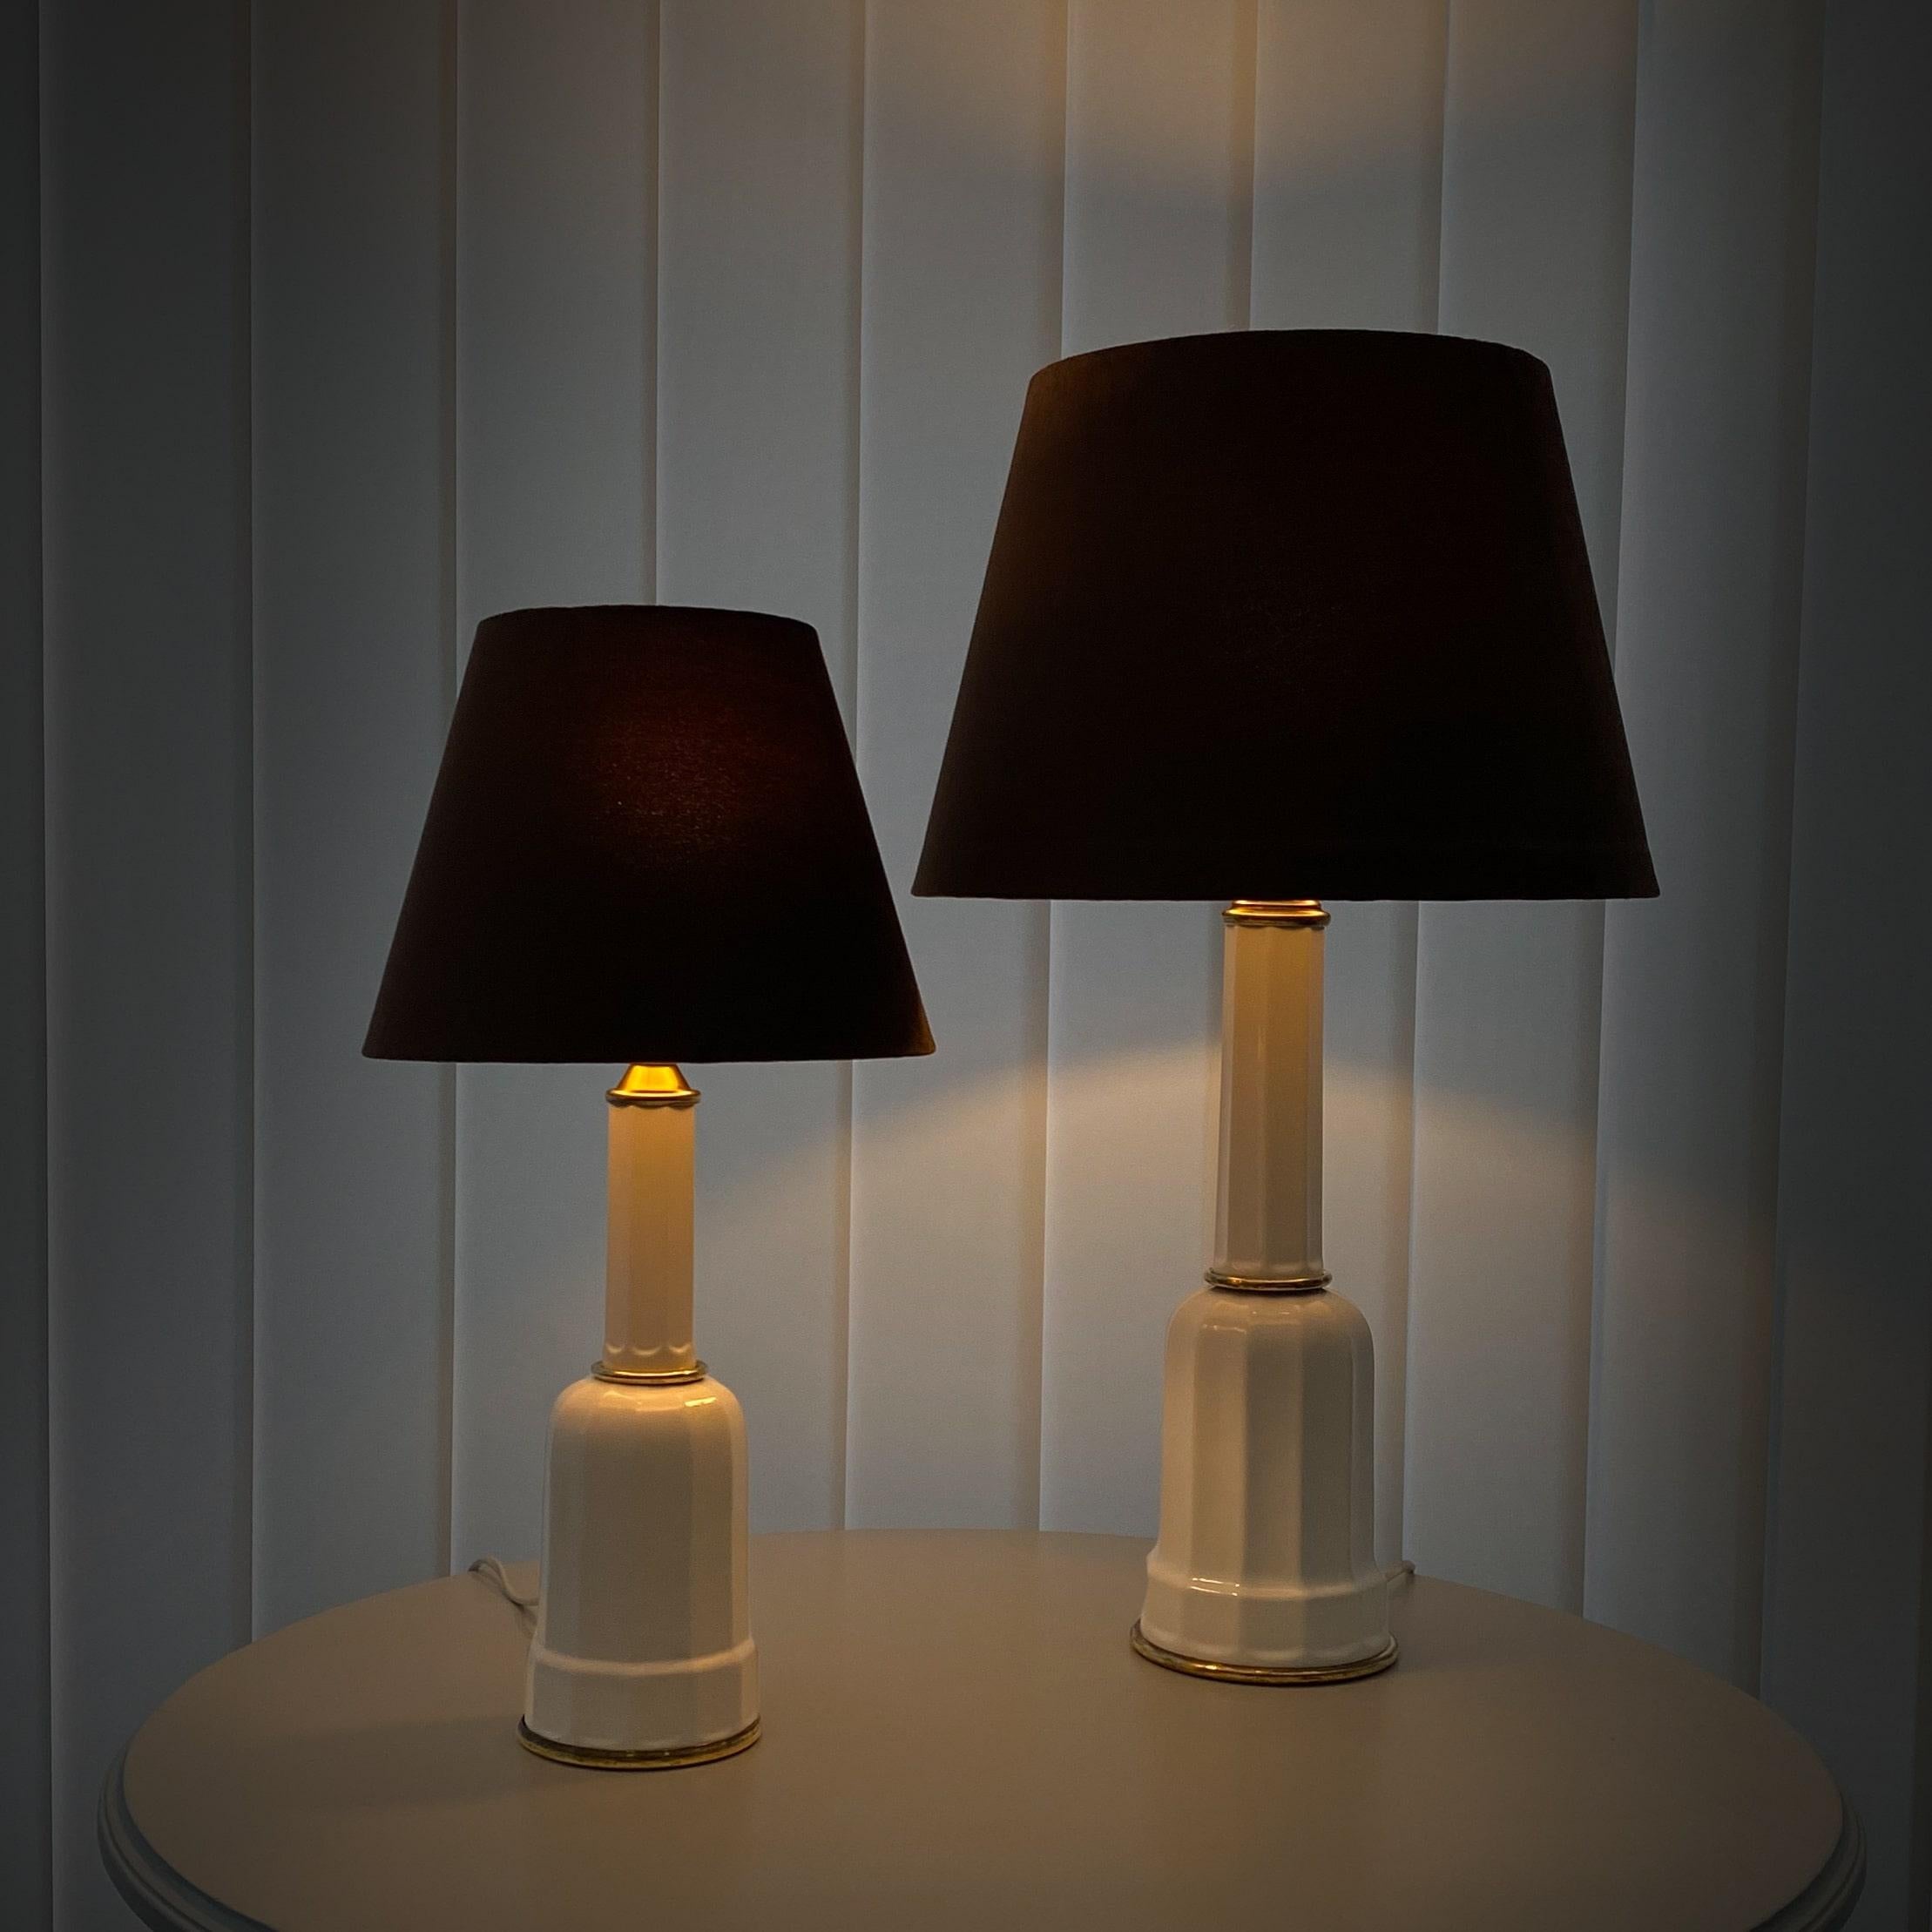 A pair of traditional Danish so-called Heiberg table lamps, made from porcelain and brass. Two identical lamps but in two different sizes. Complete with new velvet-finish lamp shades. The model got its name from an 1870s oil painting by Wilhelm